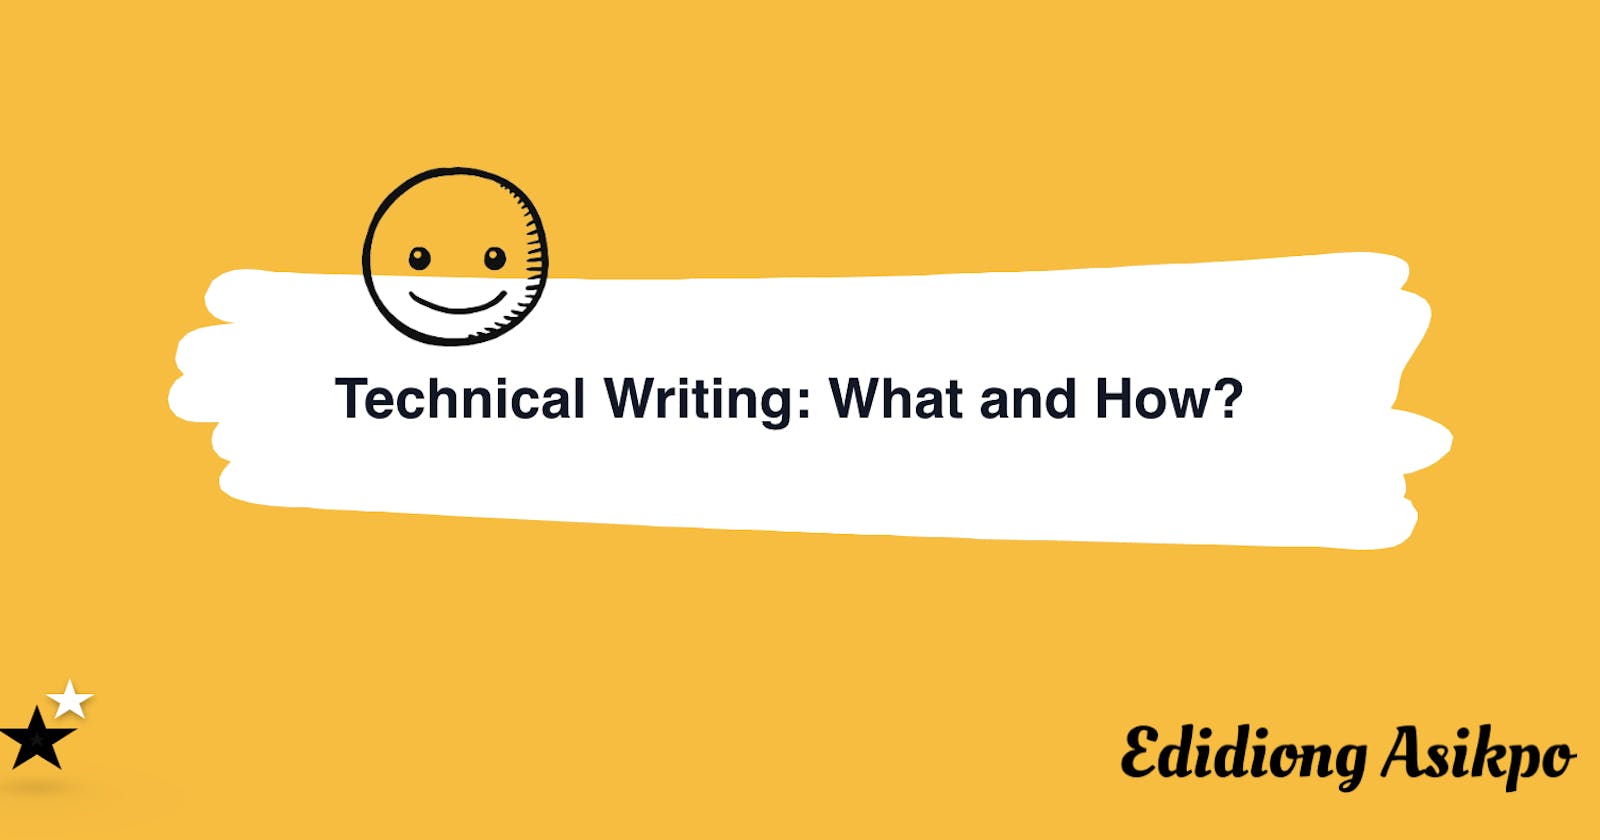 Technical Writing: What and How?